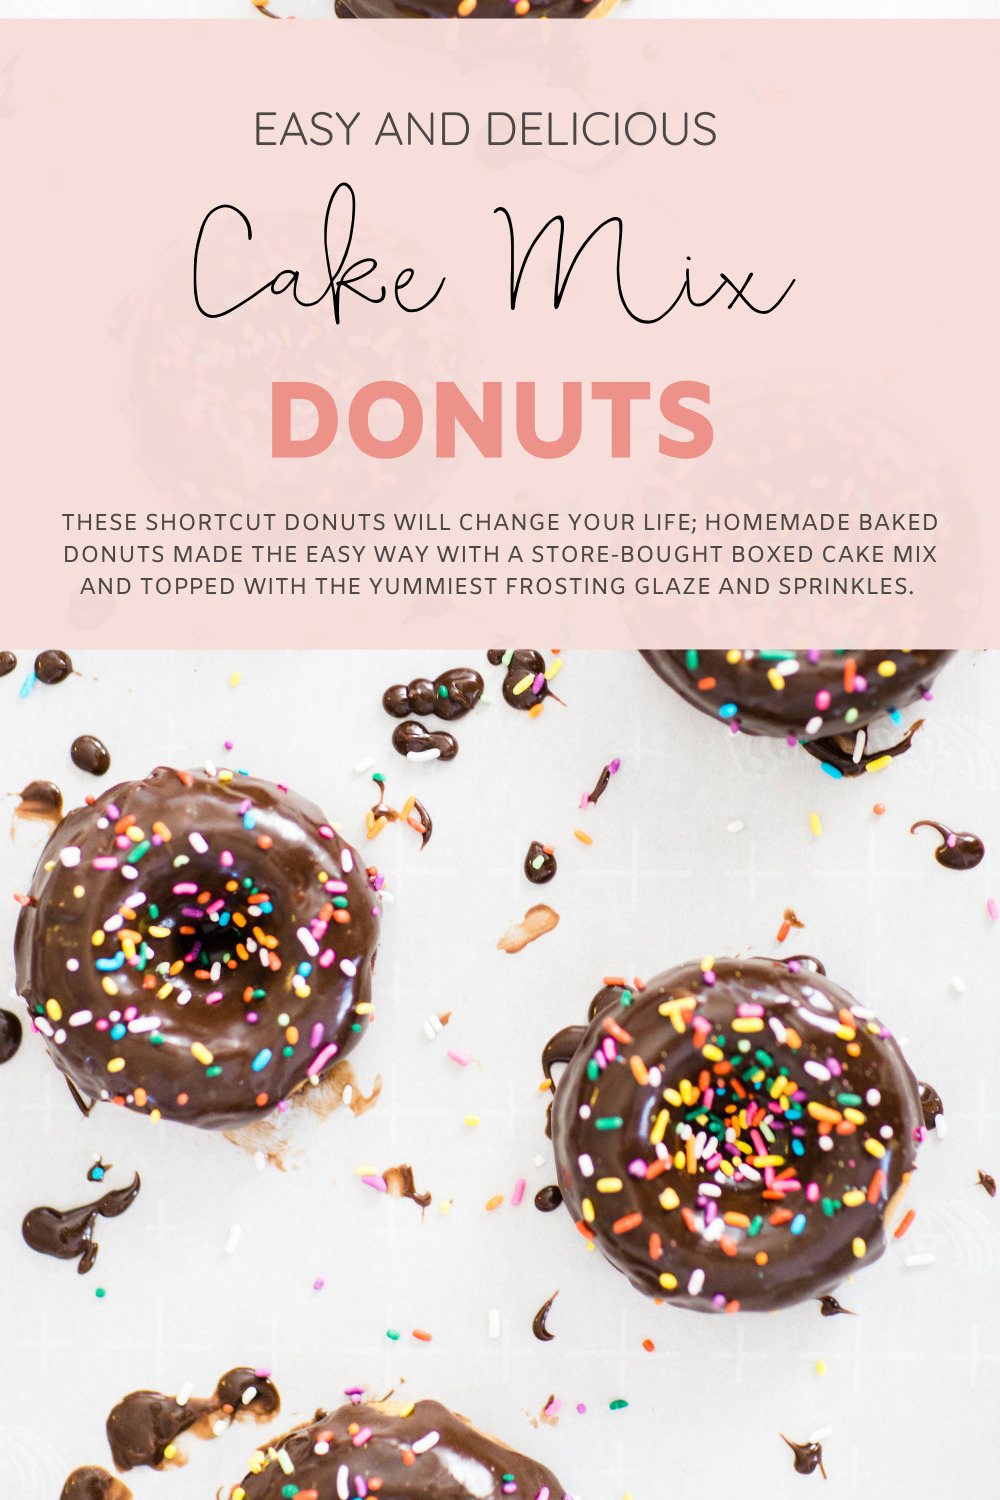 These shortcut donuts will change your life; homemade baked donuts made the easy way with a store-bought boxed cake mix and topped with the yummiest frosting glaze and sprinkles. Including our favorite simple frosting hack! | @glitterinclexi | GLITTERINC.COM